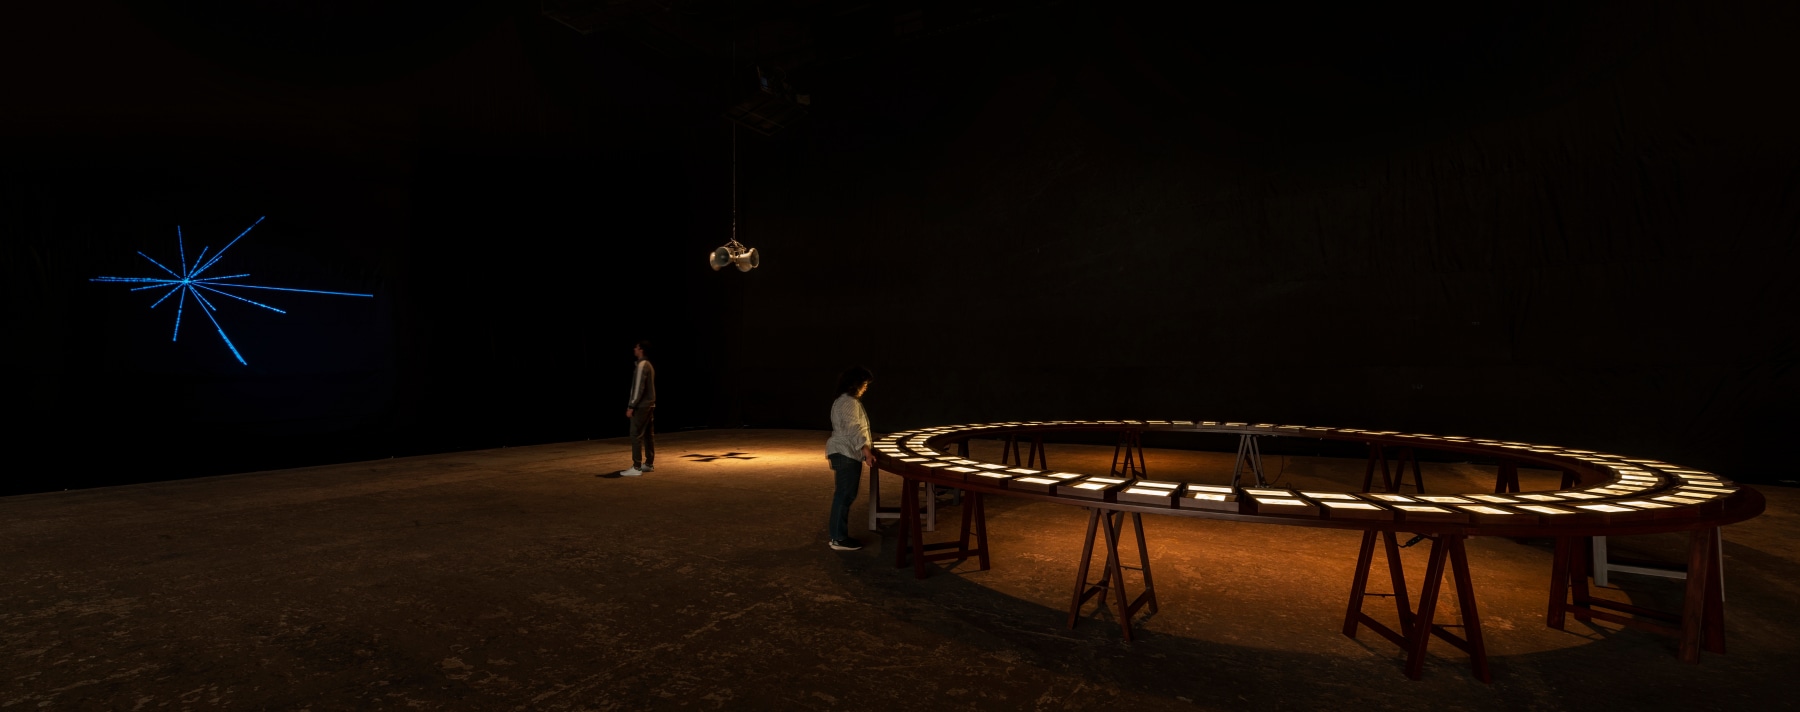 Installation view of Jitish Kallat's "Covering Letter (terranum nuncius)". On left is a blue light sculpture, a speaker hangs in the middle, and there is a large round table on the right.